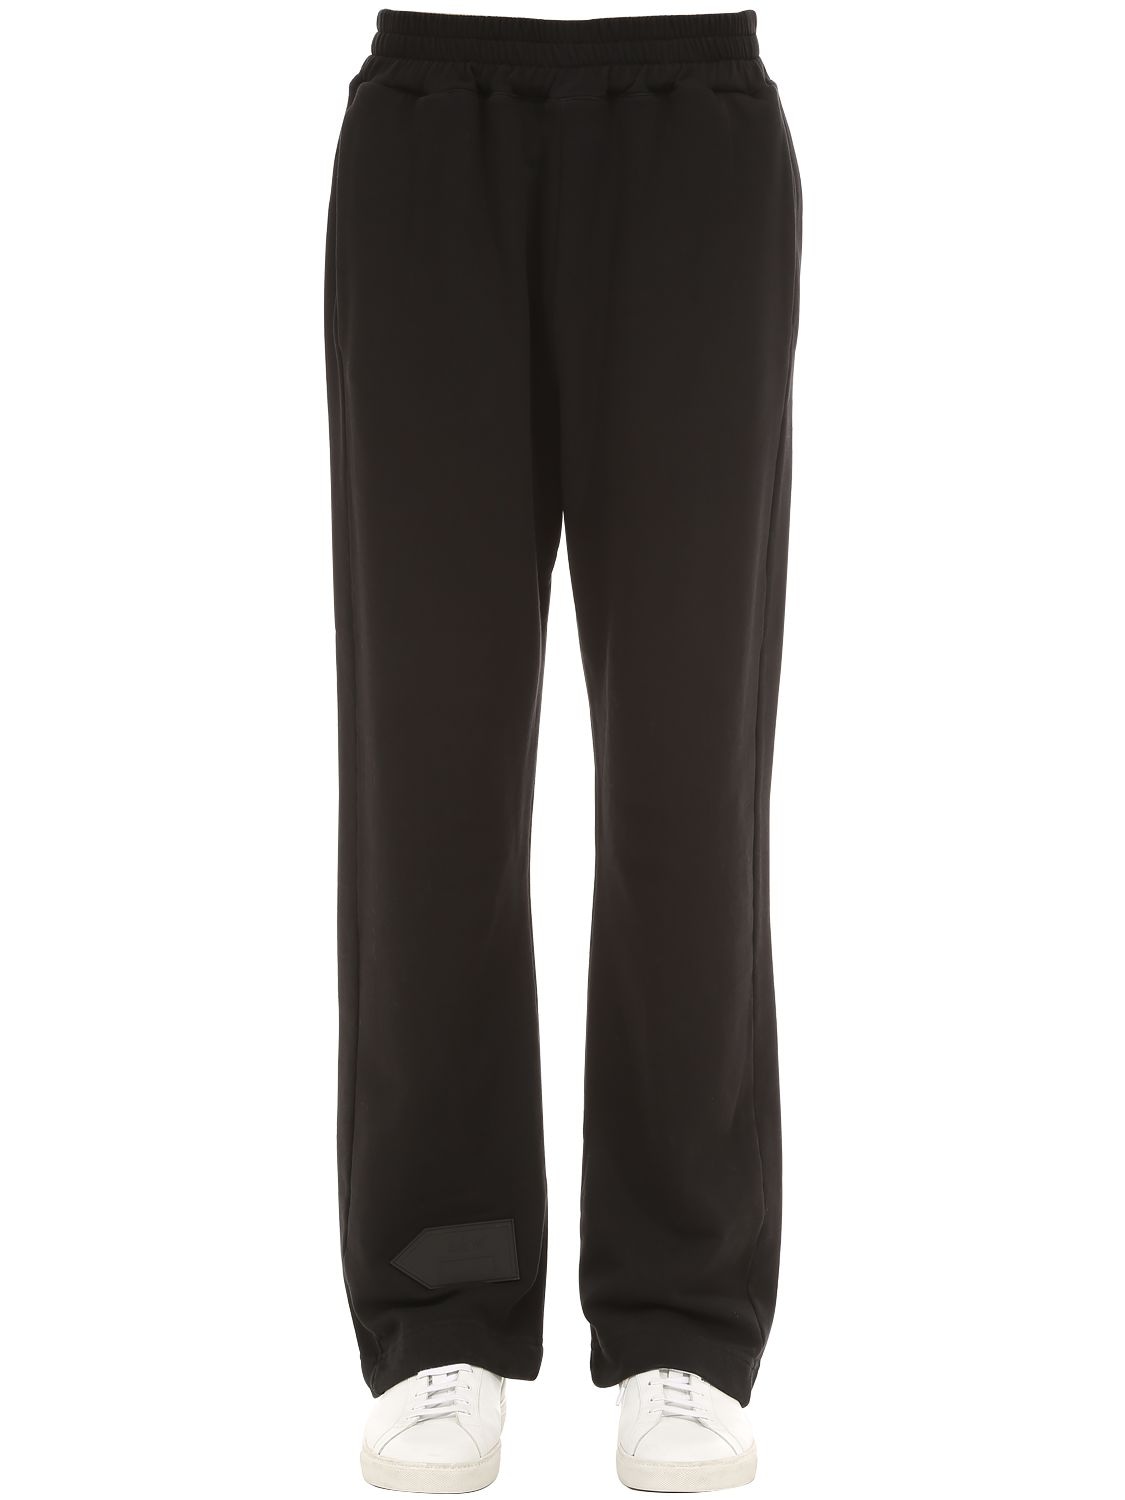 Relaxed Fit Cotton Sweatpants - A-COLD-WALL* - Modalova